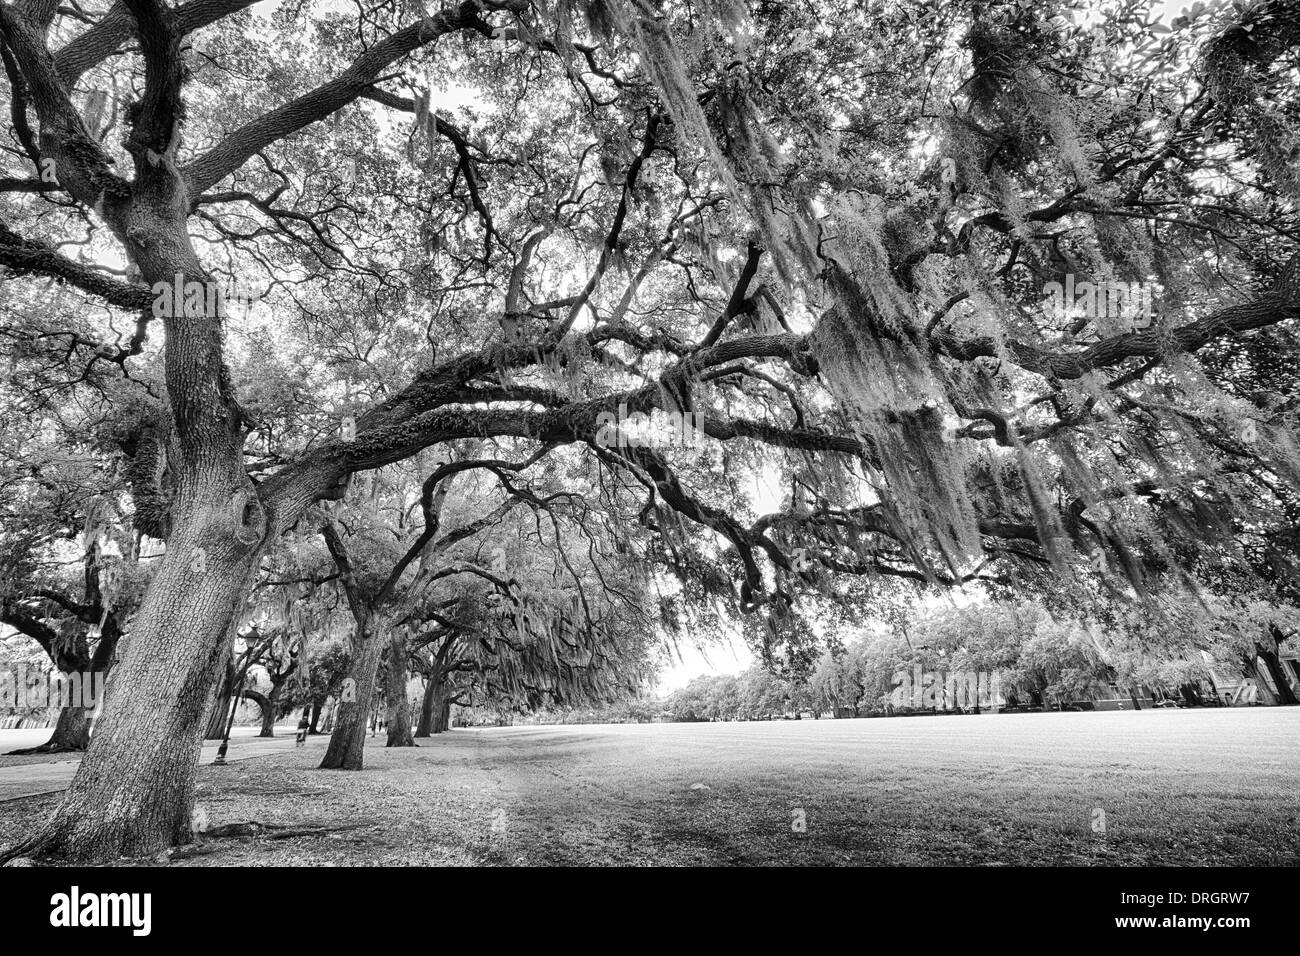 The famous live Southern Live Oaks covered in Spanish Moss growing in Savannah's historic squares. Savannah, Georgia Stock Photo